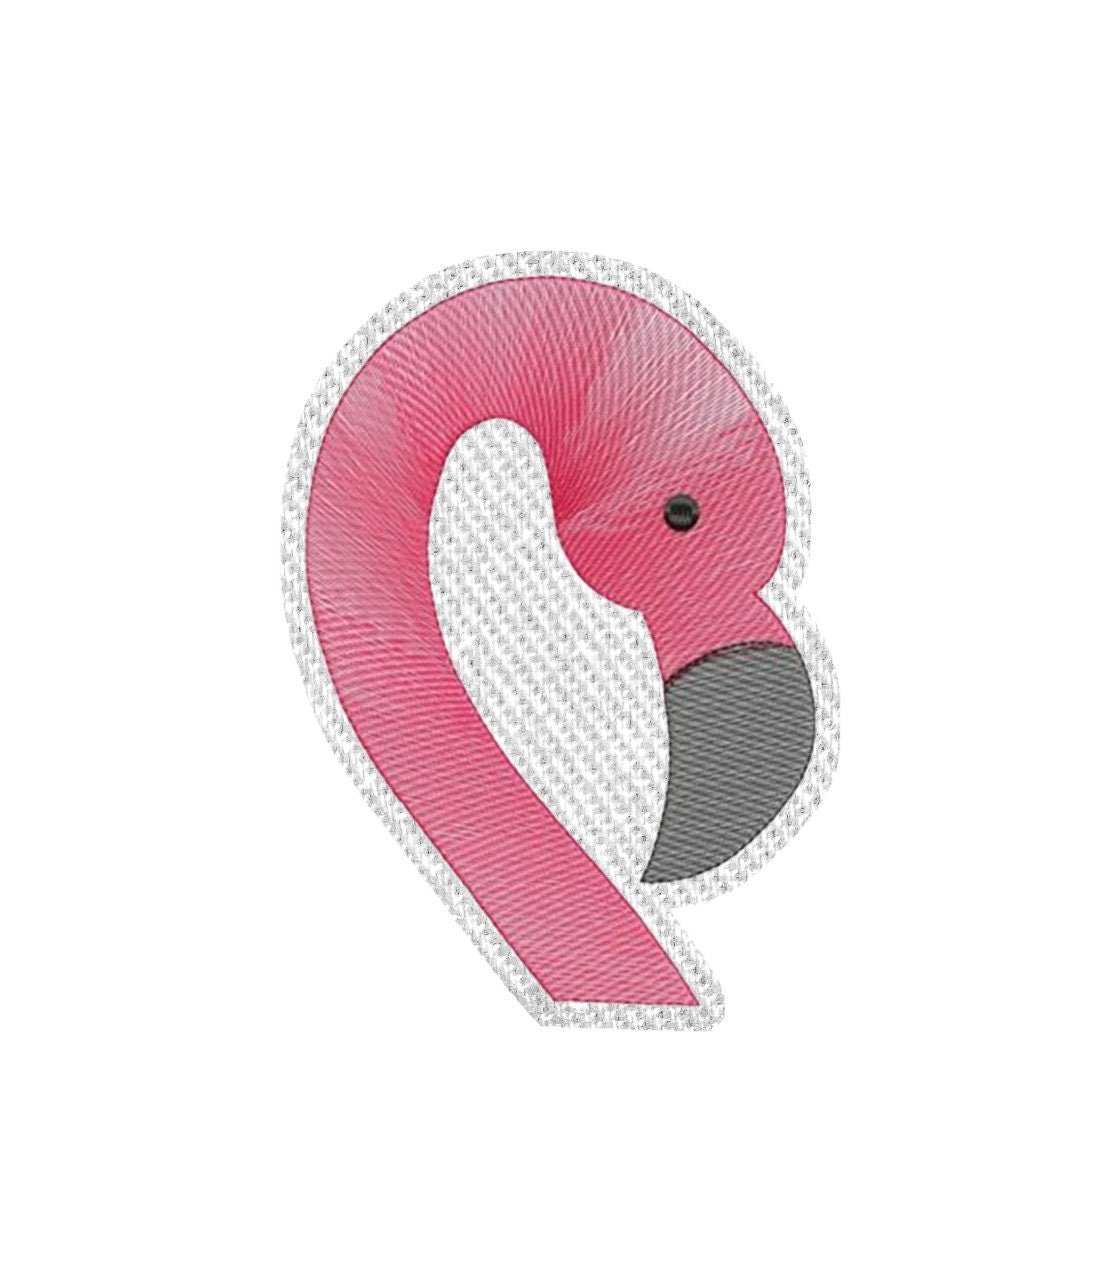 Flamingo Head Iron on Patch / Sew on embroidered patches - Animals Birds Cultures Embroidery Women Applique Merit Badge for Clothing Jacket